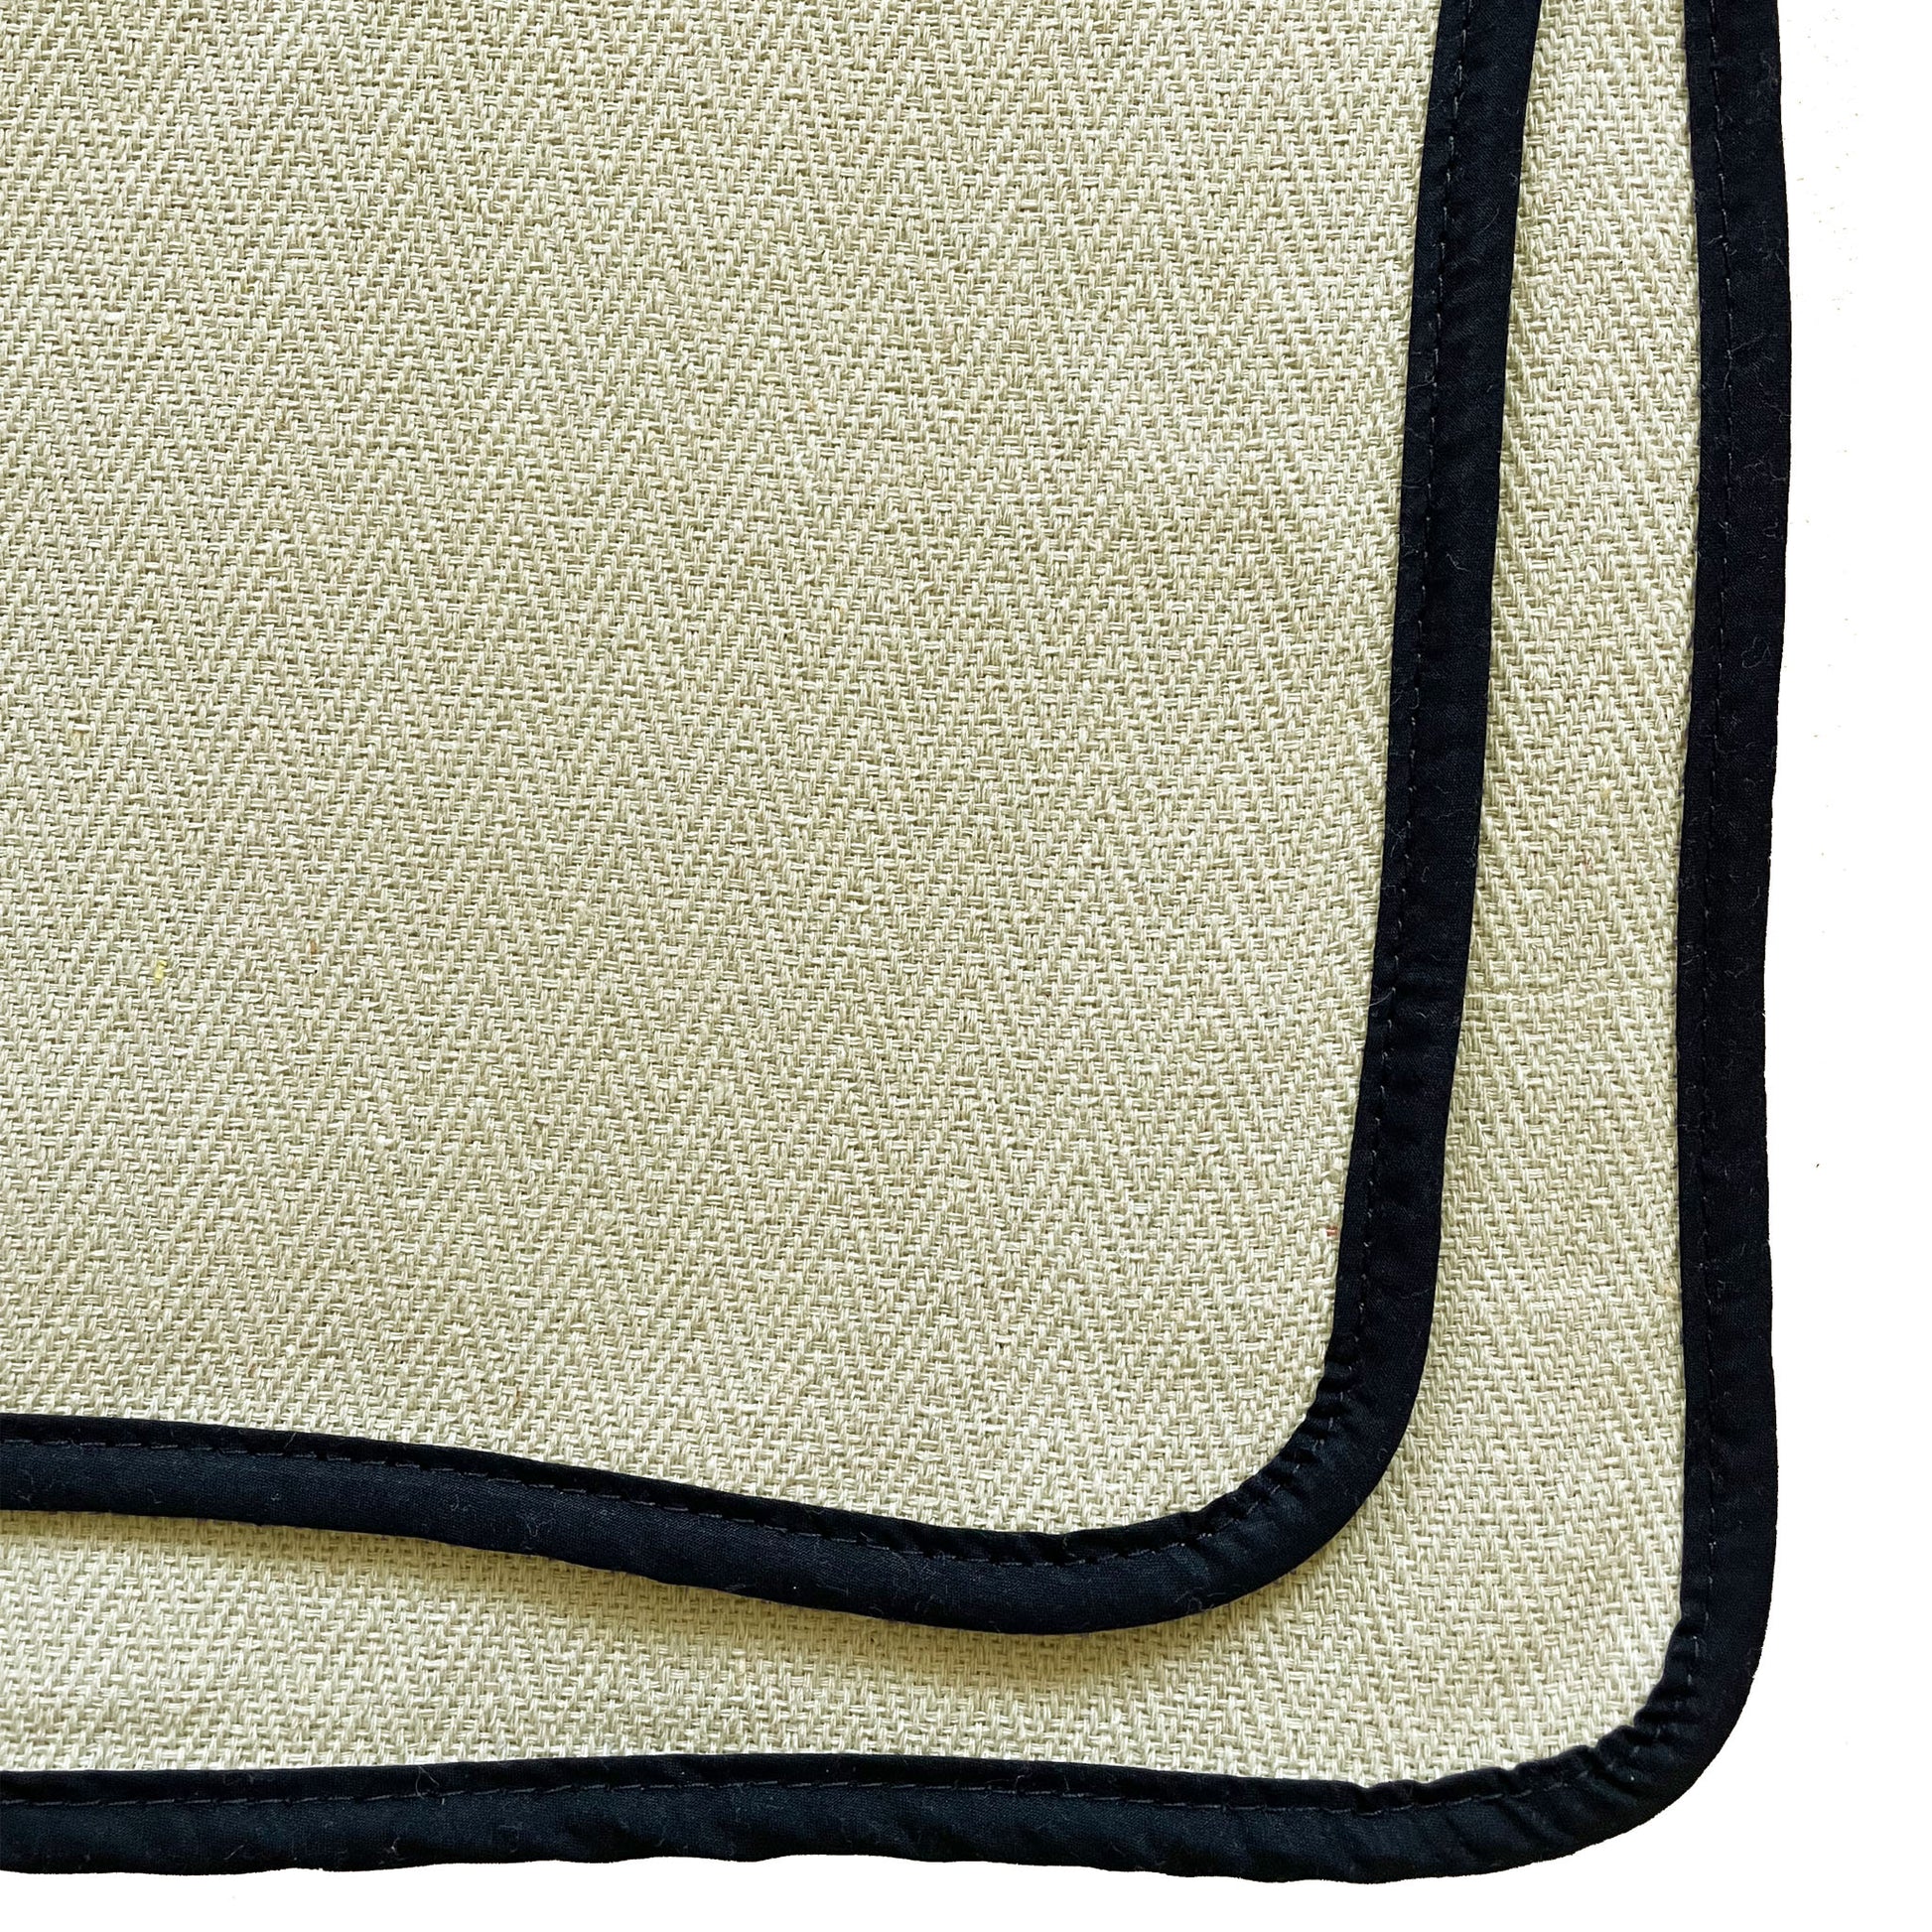 Oven Cloth - Crisp and Dene - Utility Oven Cloth With Black Binding